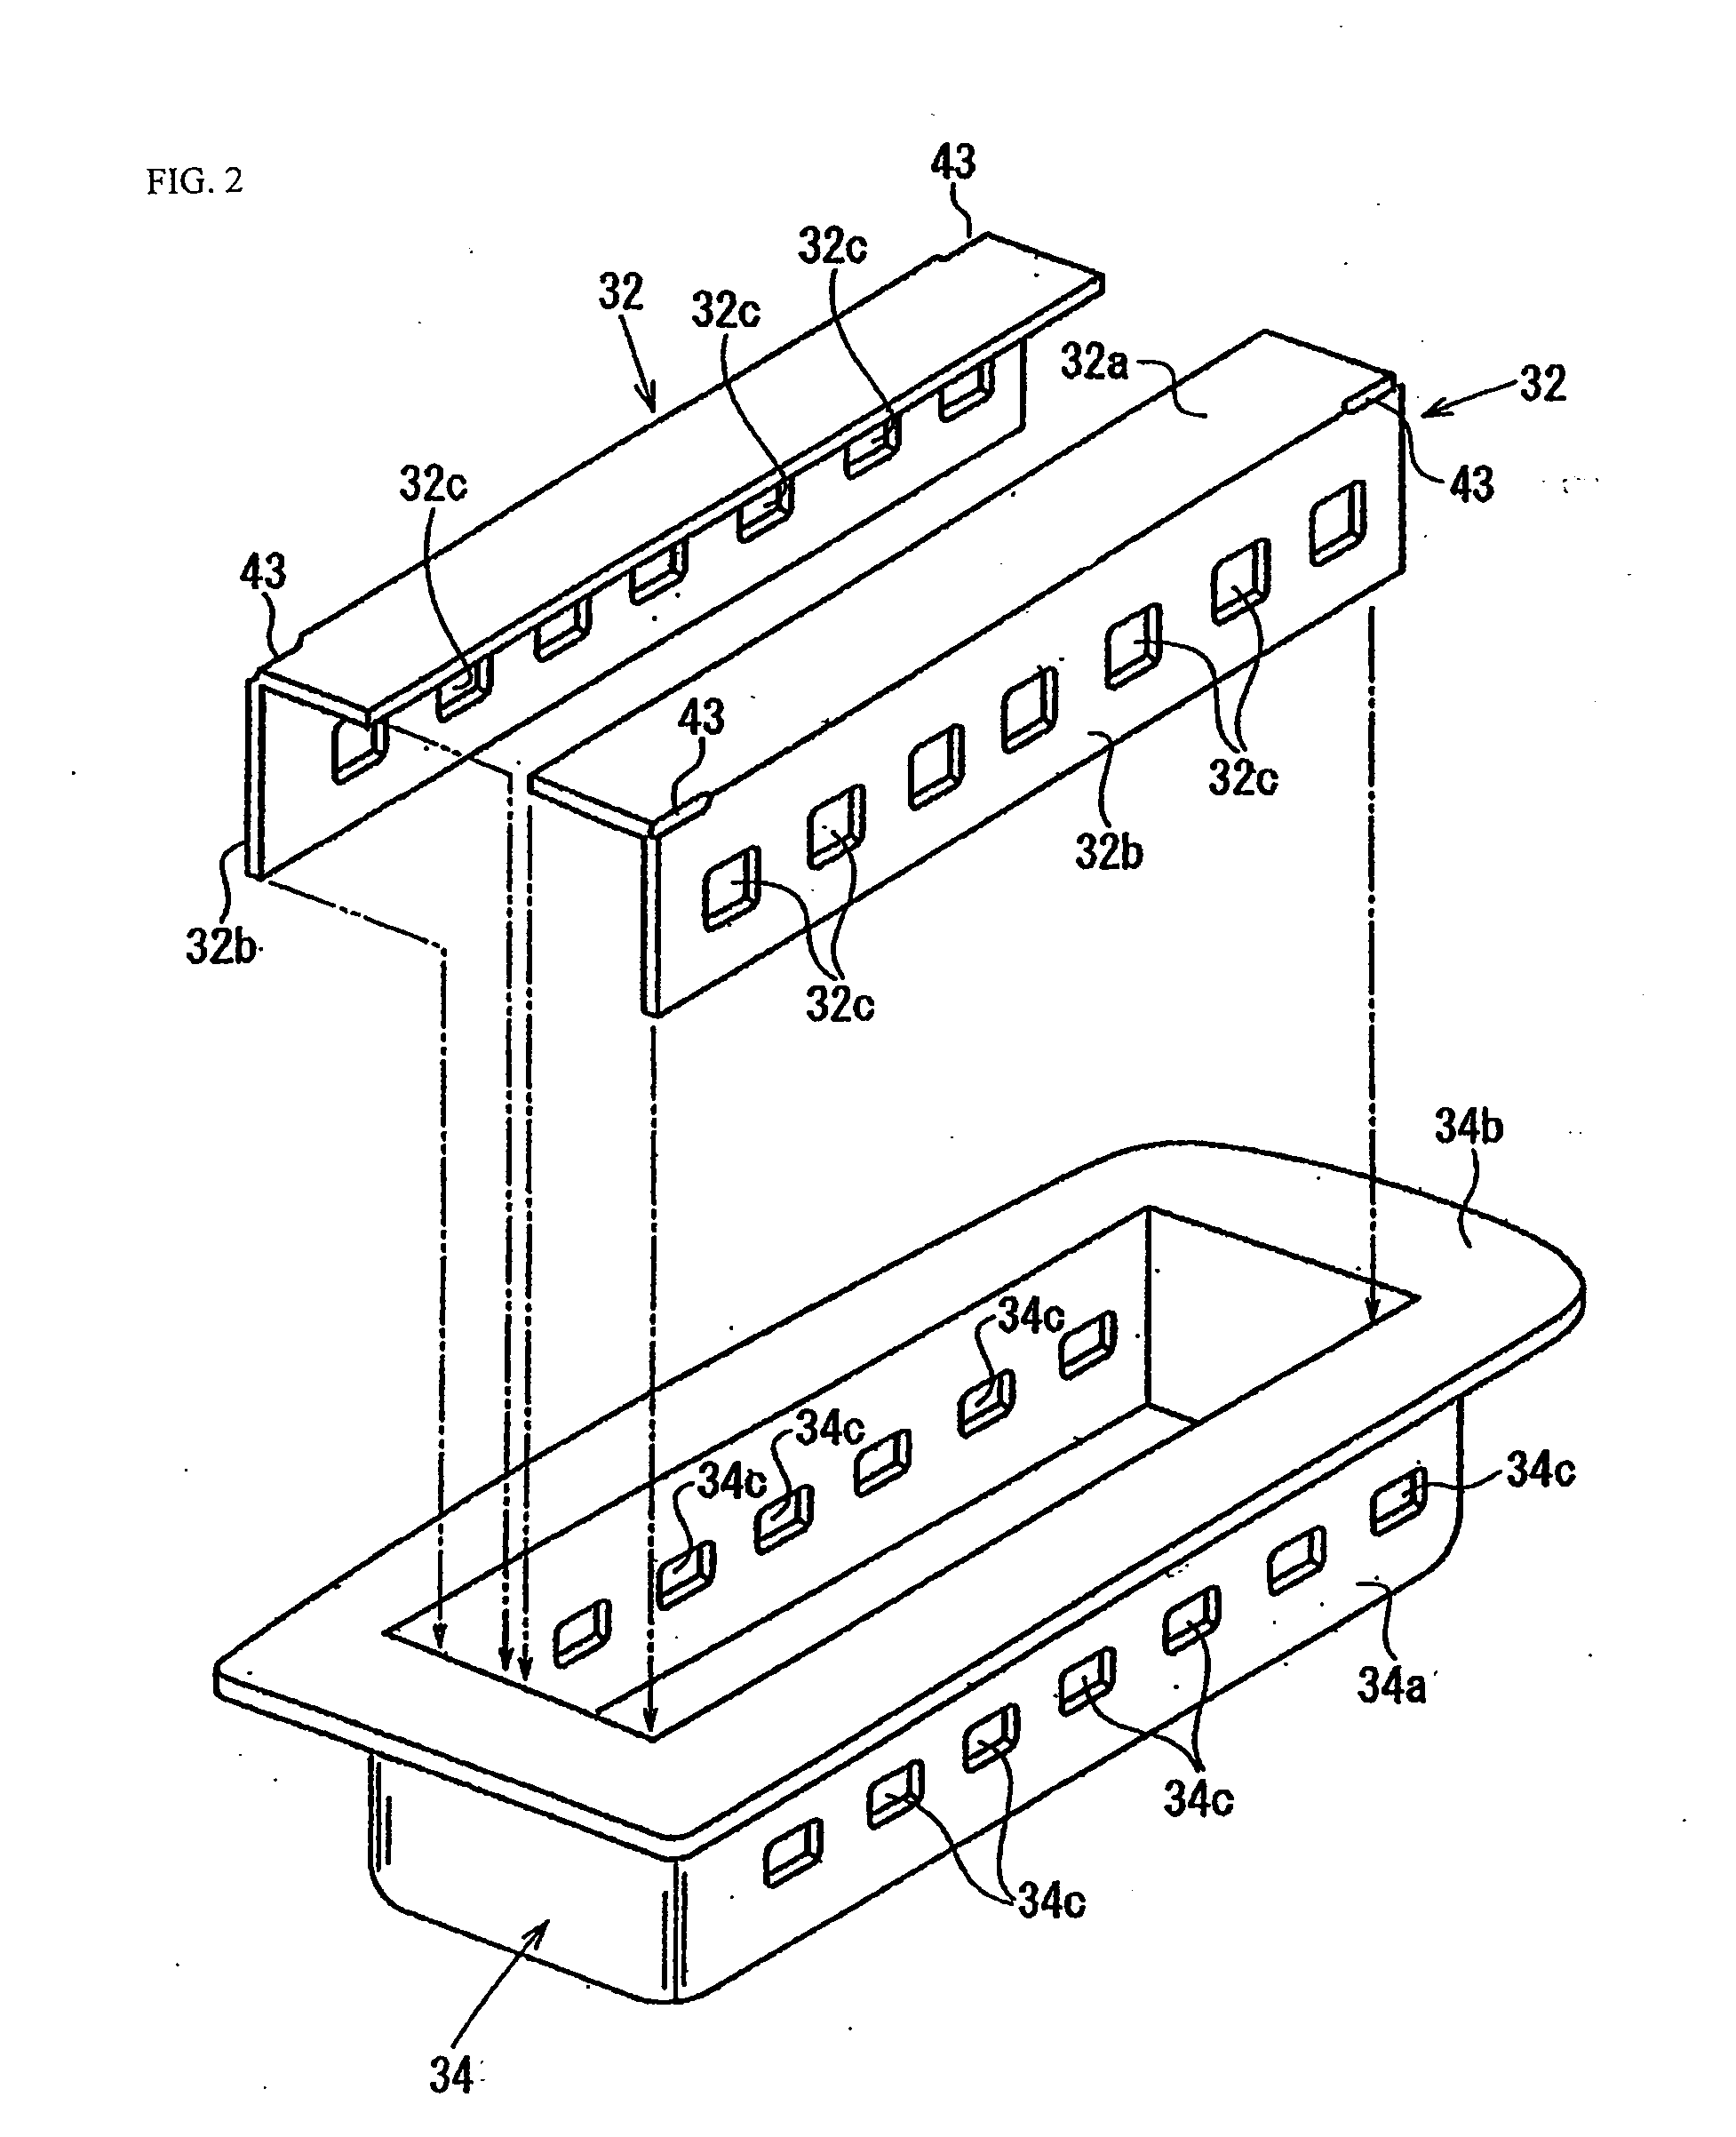 Interior Panel Assembly and Airbag Device